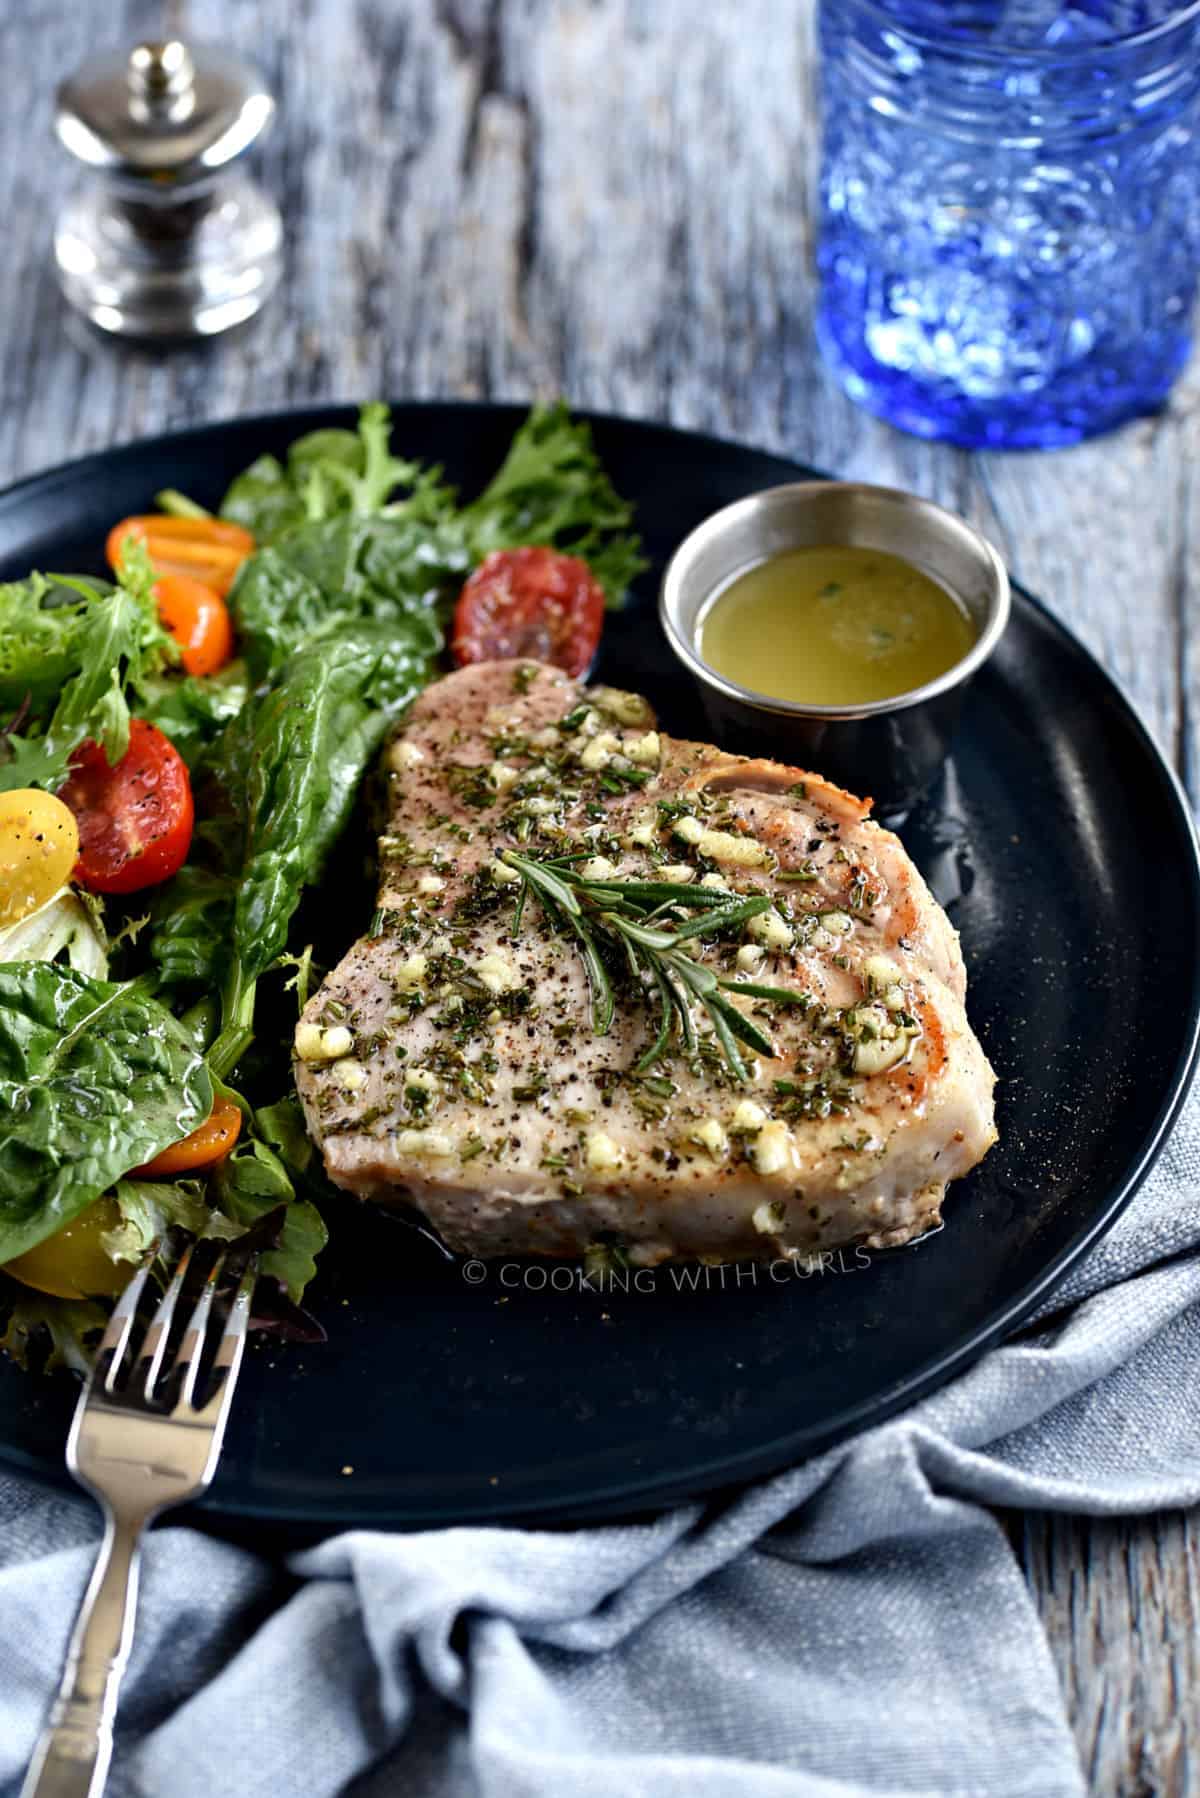 Thick, bone-in pork chop topped with garlic-rosemary butter with a green salad and cherry tomatoes on the side.